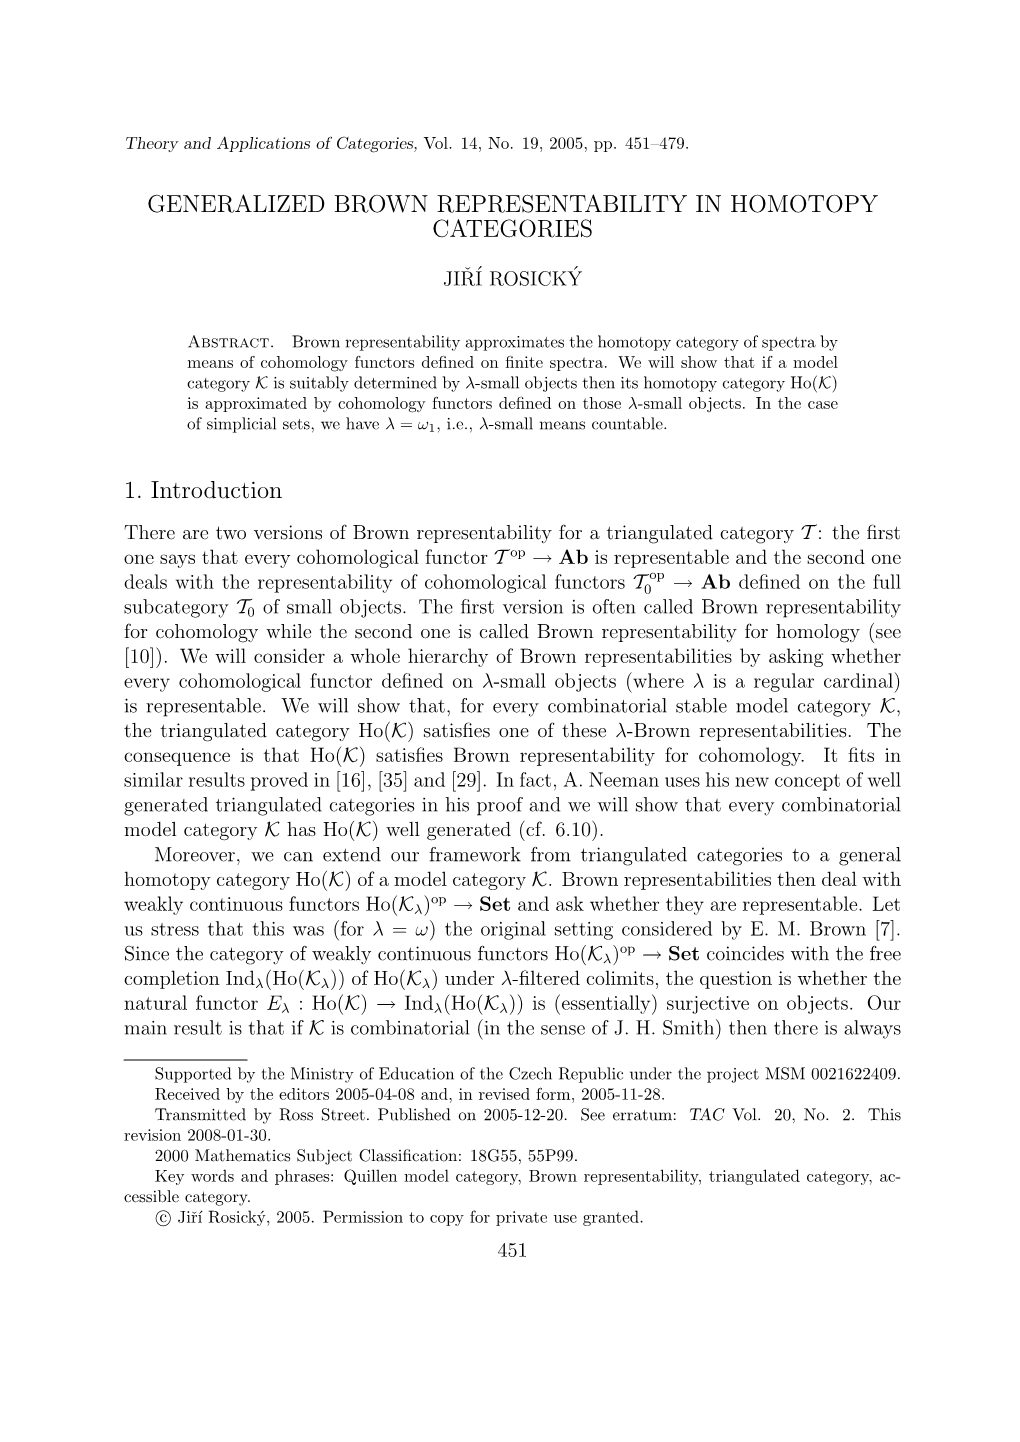 GENERALIZED BROWN REPRESENTABILITY in HOMOTOPY CATEGORIES 1. Introduction